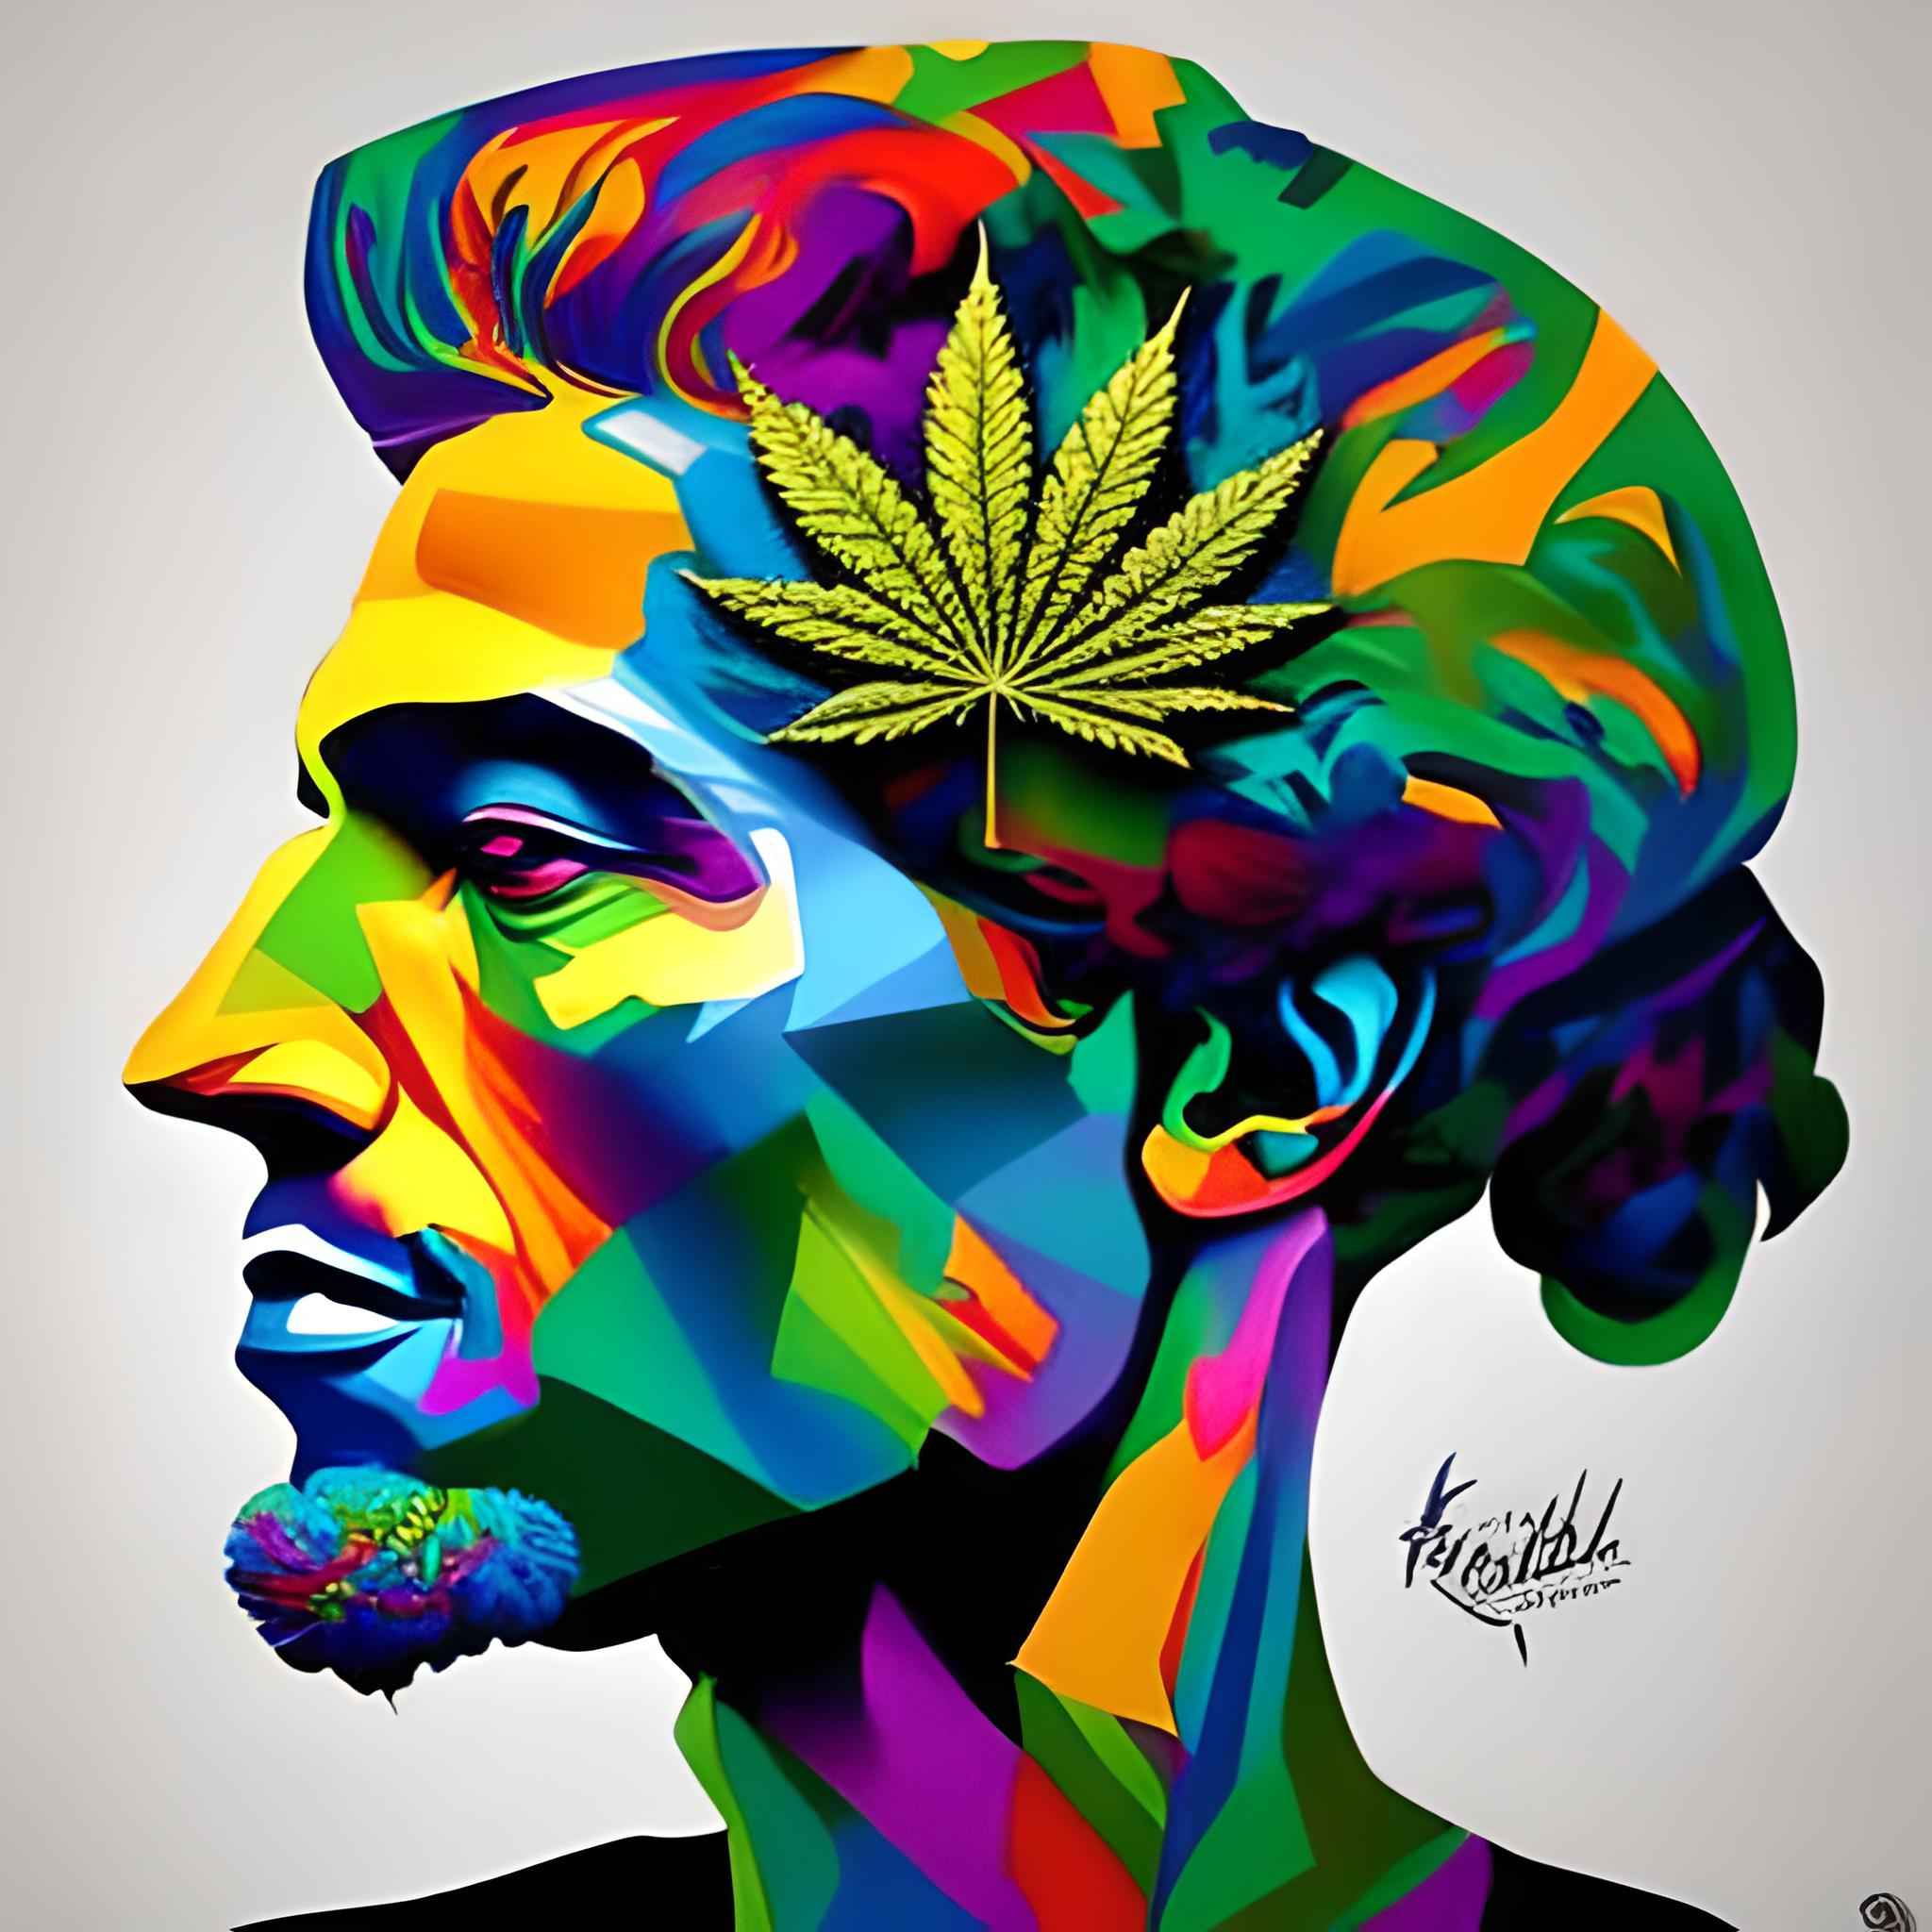 A colorful illustration of a person’s profile with a cannabis leaf on the head.